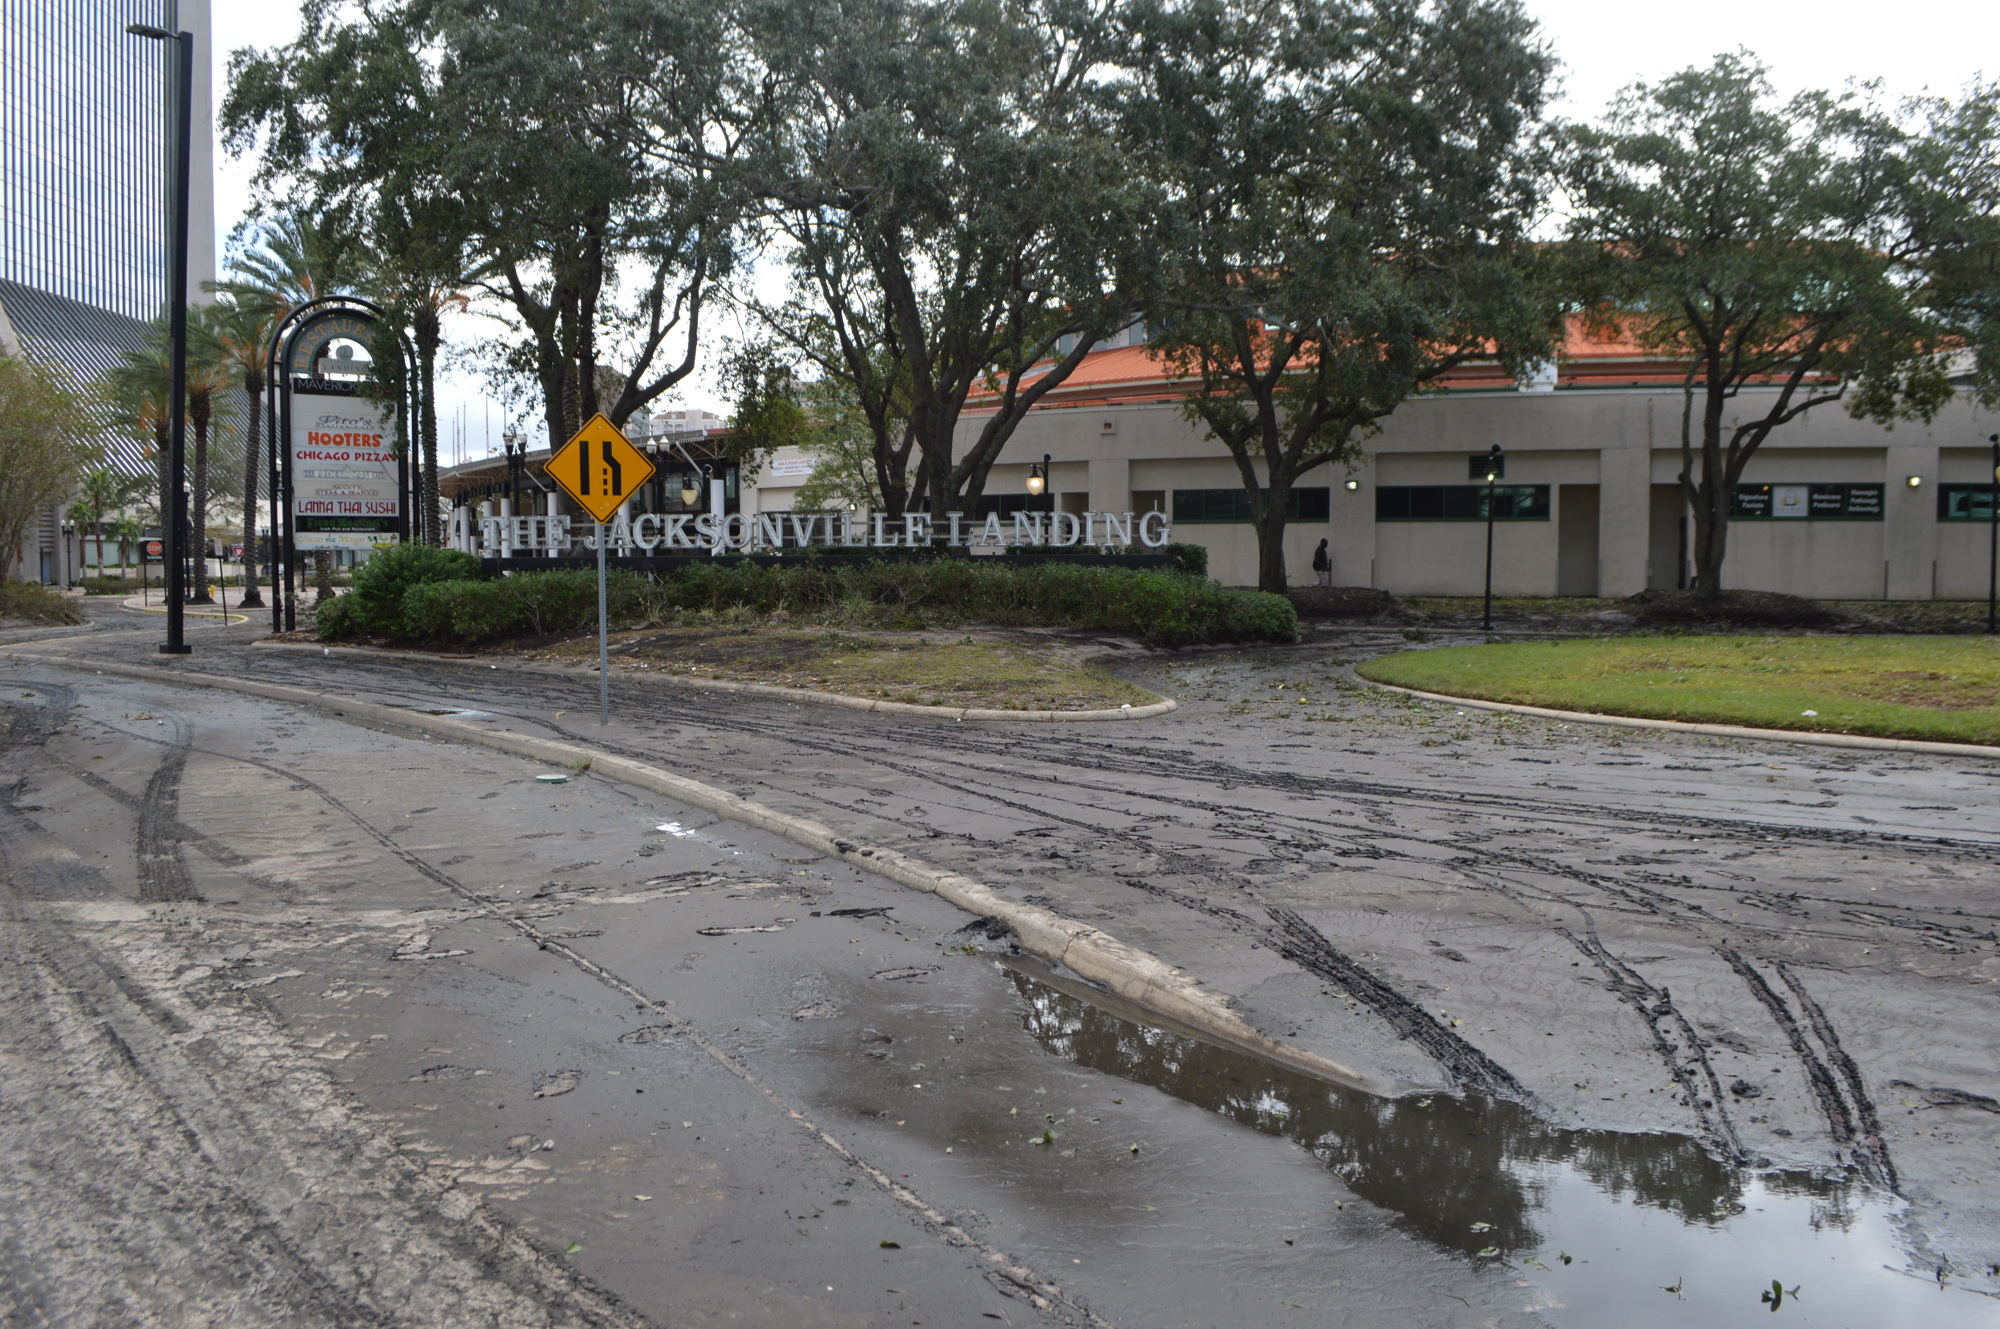 Mud and debris lined Water Street near the Jacksonville Landing Tuesday in the wake of historic flooding caused by Hurricane Irma pushing the St. Johns River over the bulkhead.   (Photo by David Cawton)